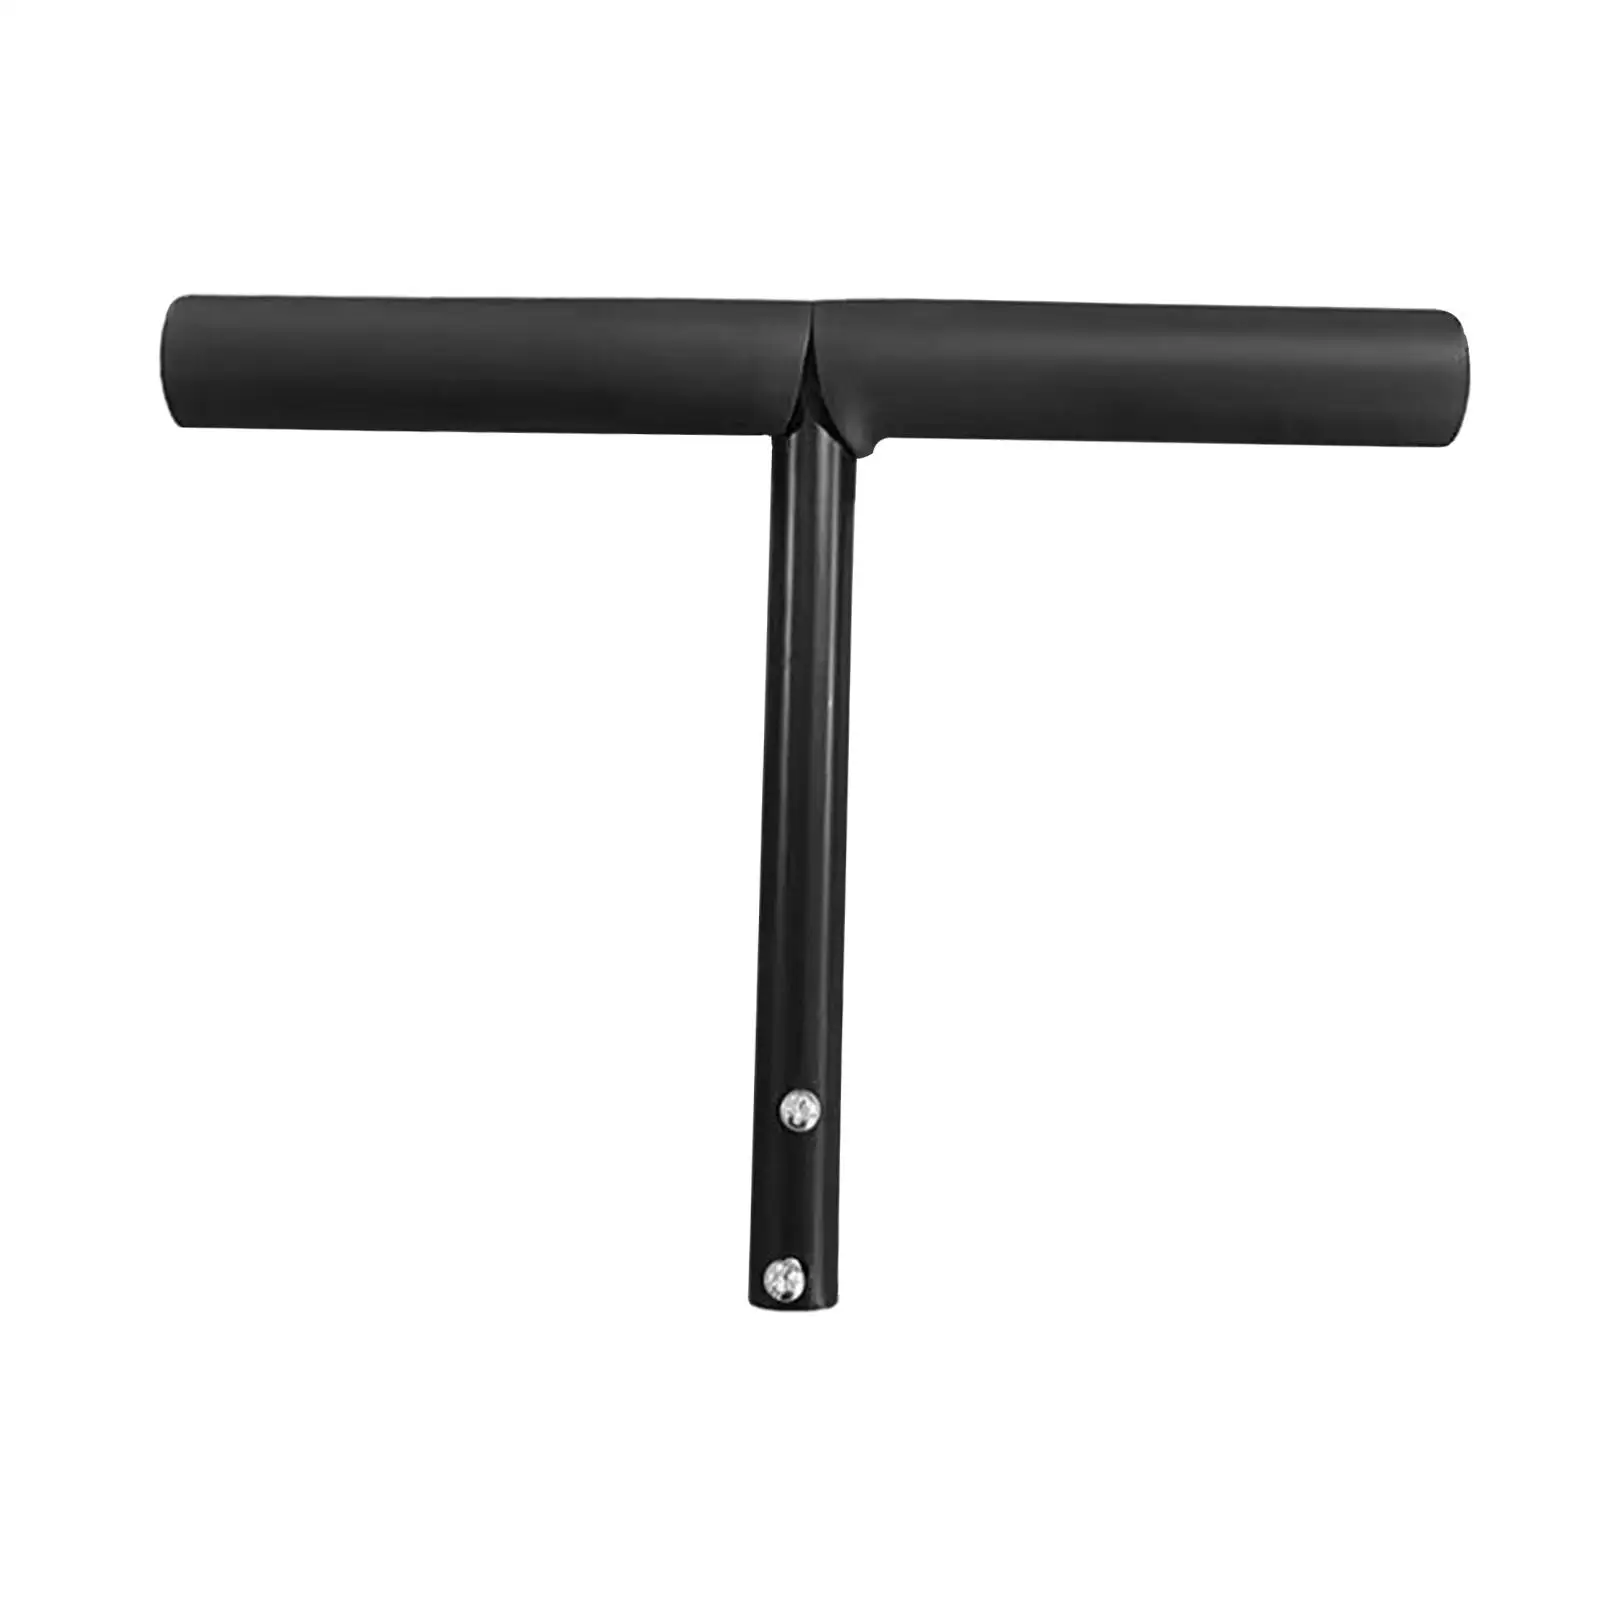 T Shaped Push Handle Bar Sturdy Kids Tricycle Accessories Baby Bike Accessory Replacement Parts for Travel Home Outdoor